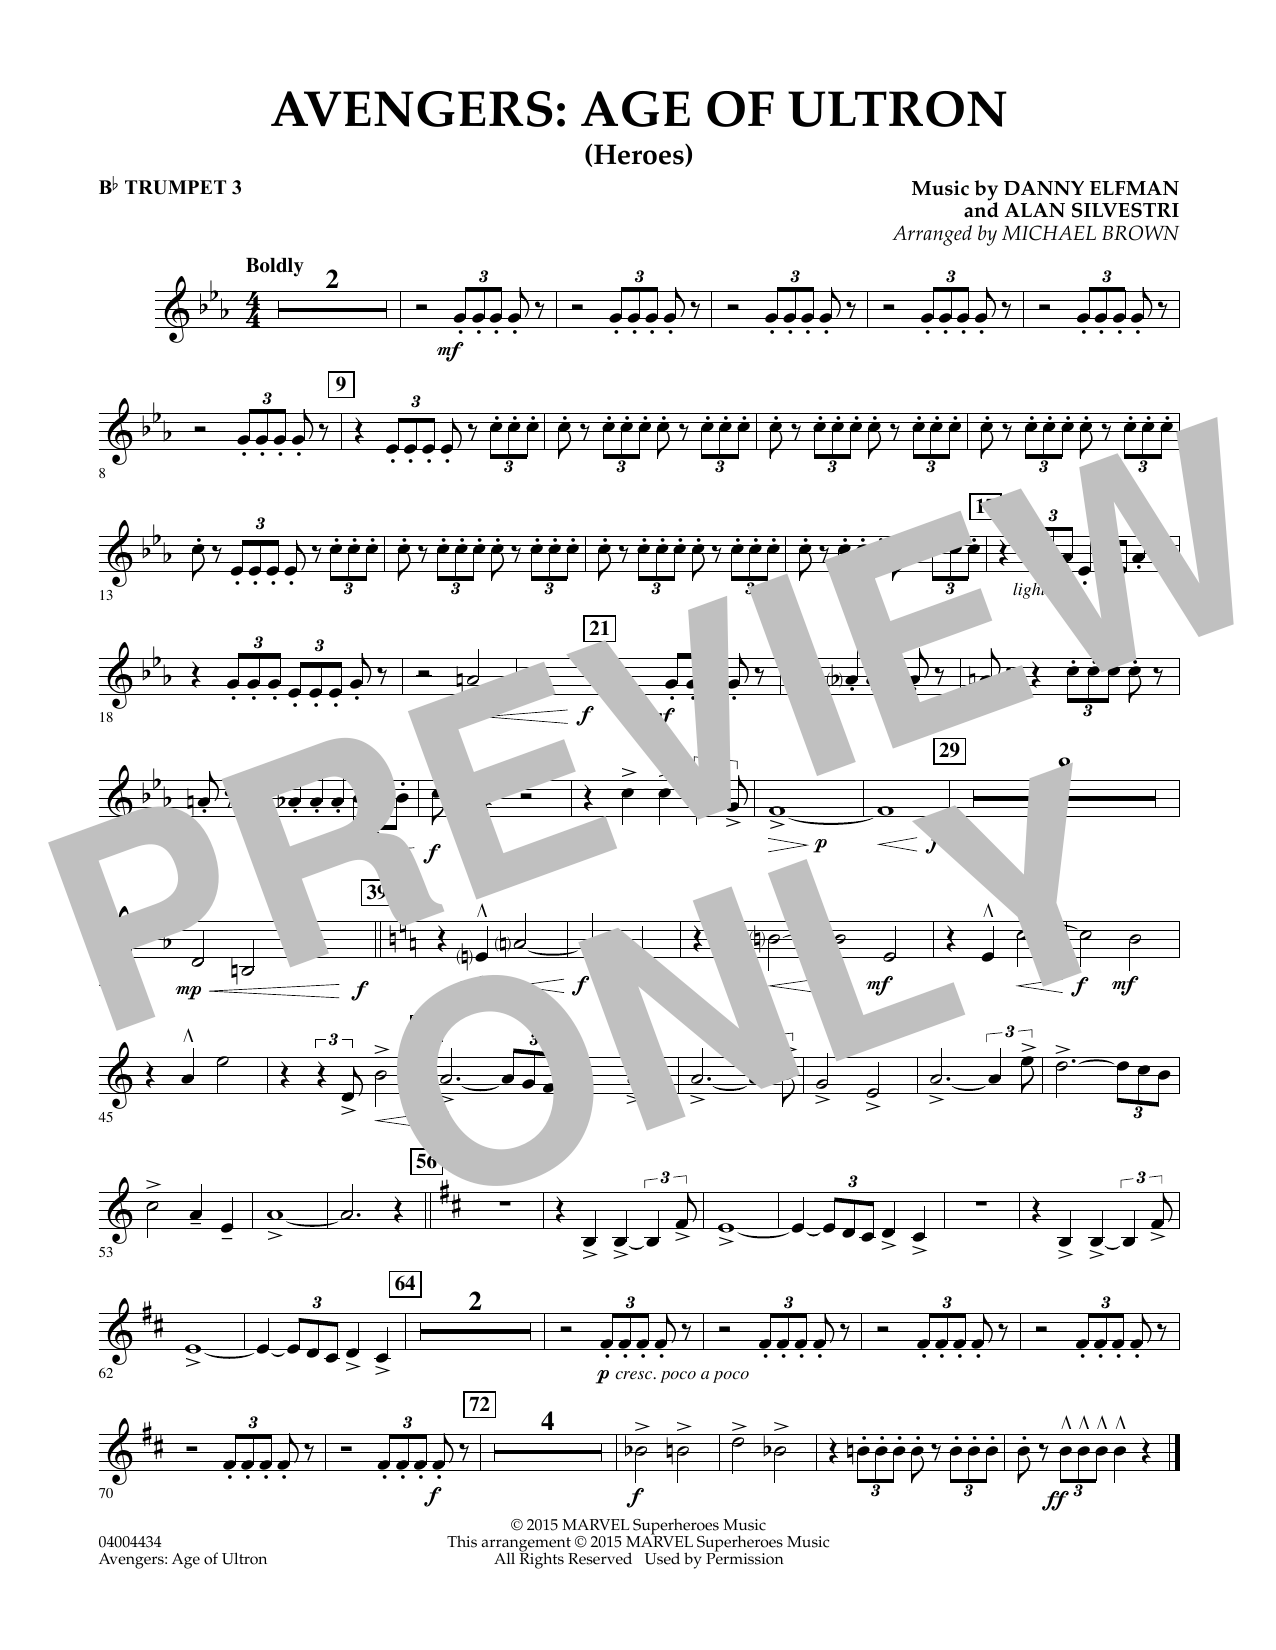 Michael Brown Avengers: The Age of Ultron (Main Theme) - Bb Trumpet 3 sheet music notes and chords. Download Printable PDF.